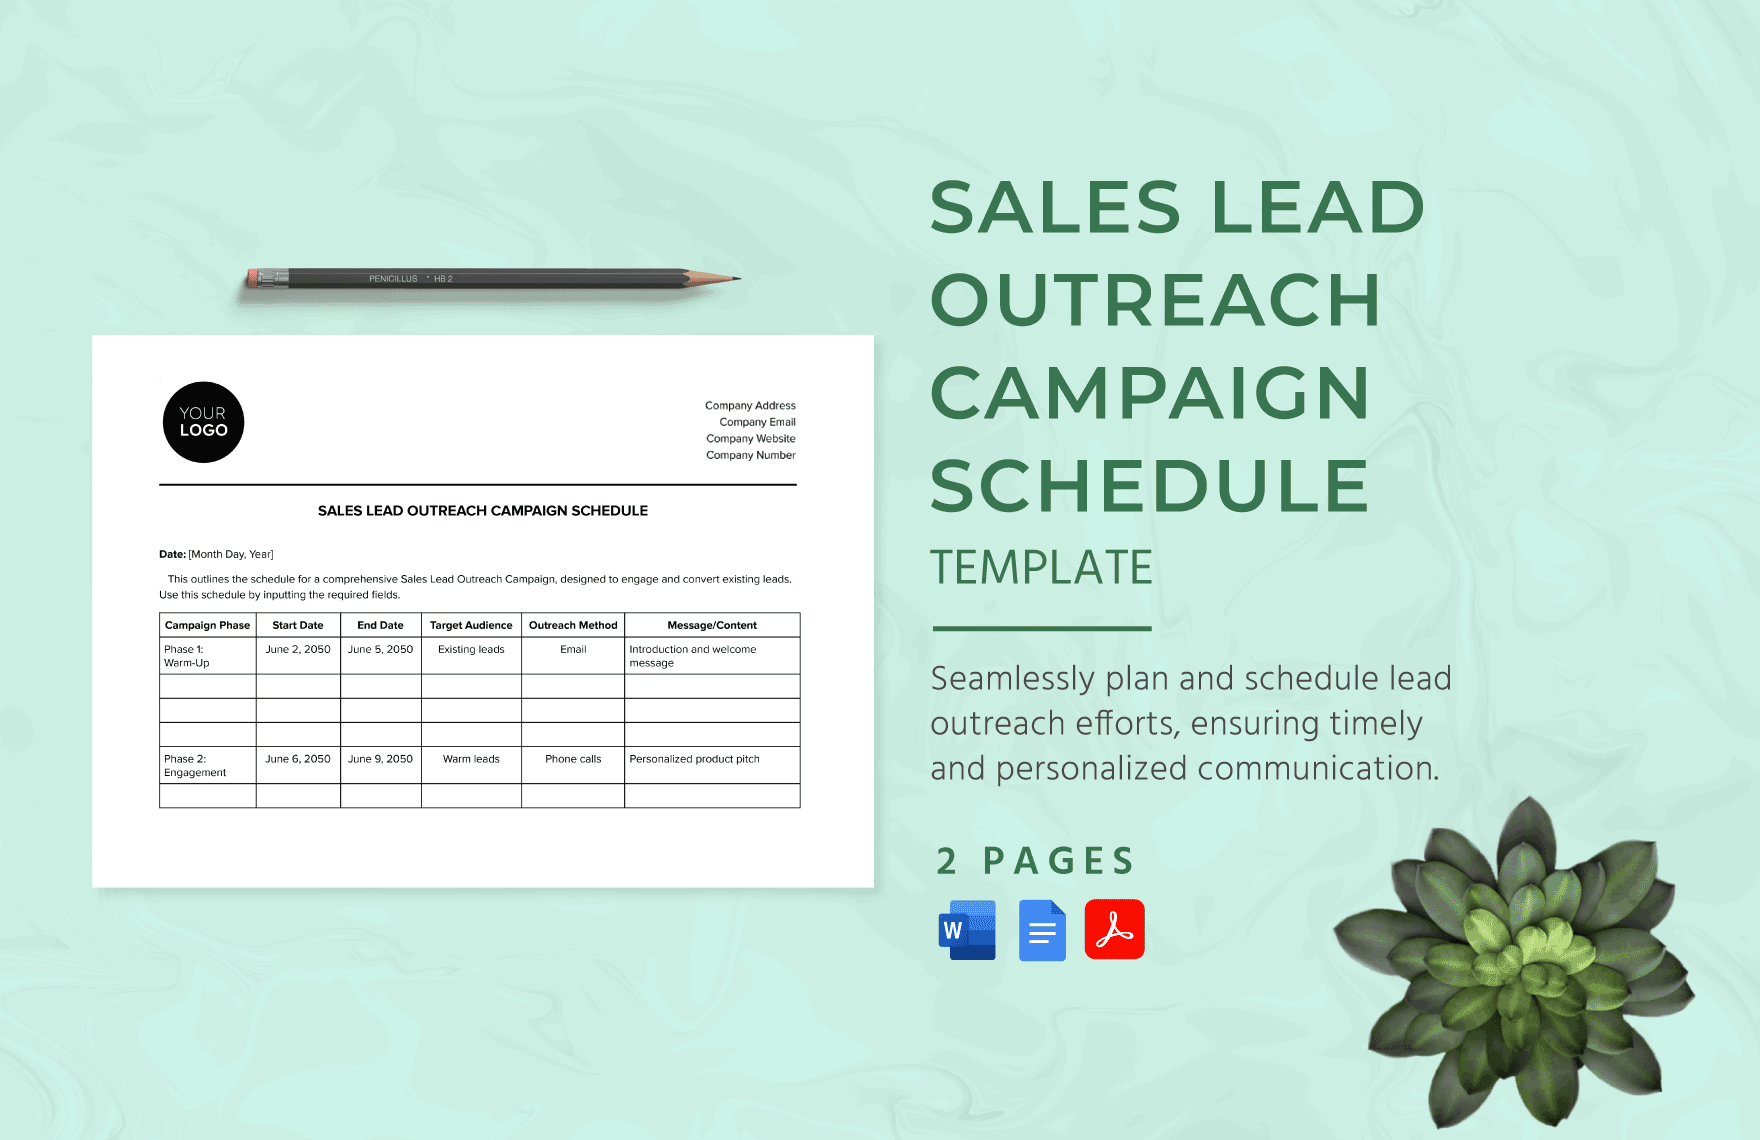 Sales Lead Outreach Campaign Schedule Template in Word, Google Docs, PDF